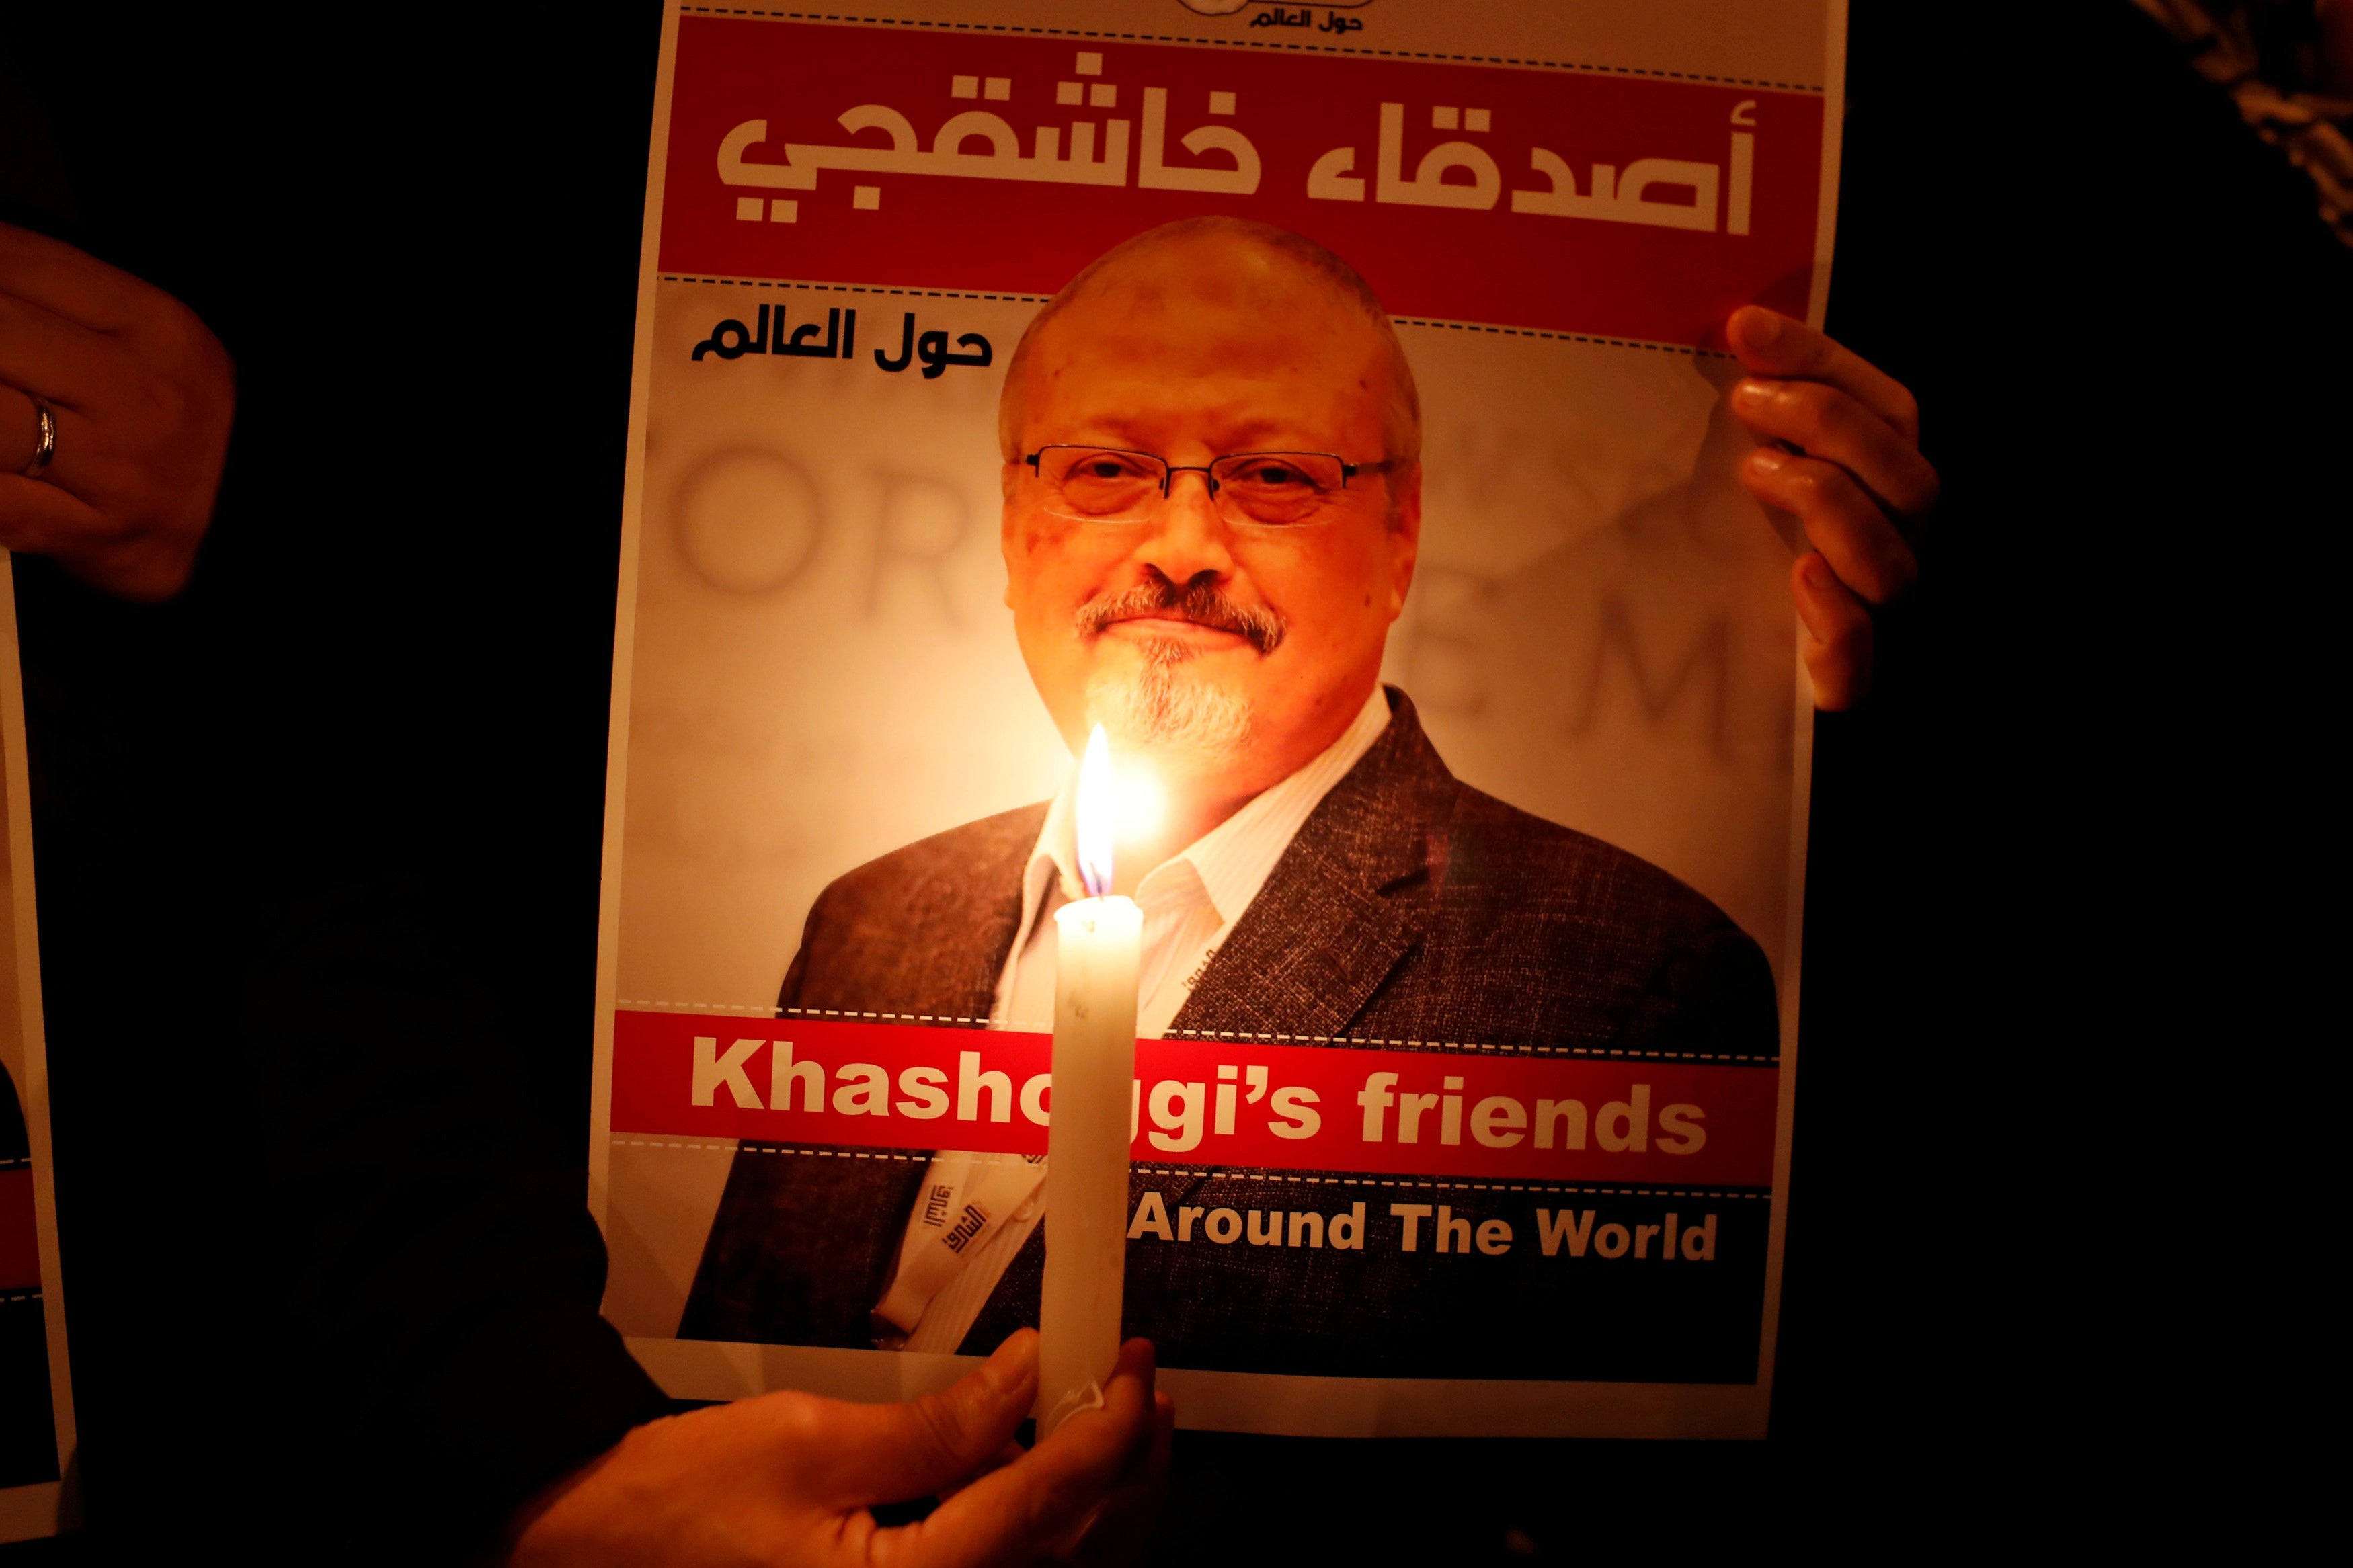 A demonstrator holds a candle in front of a poster with a picture of Saudi journalist Jamal Khashoggi.